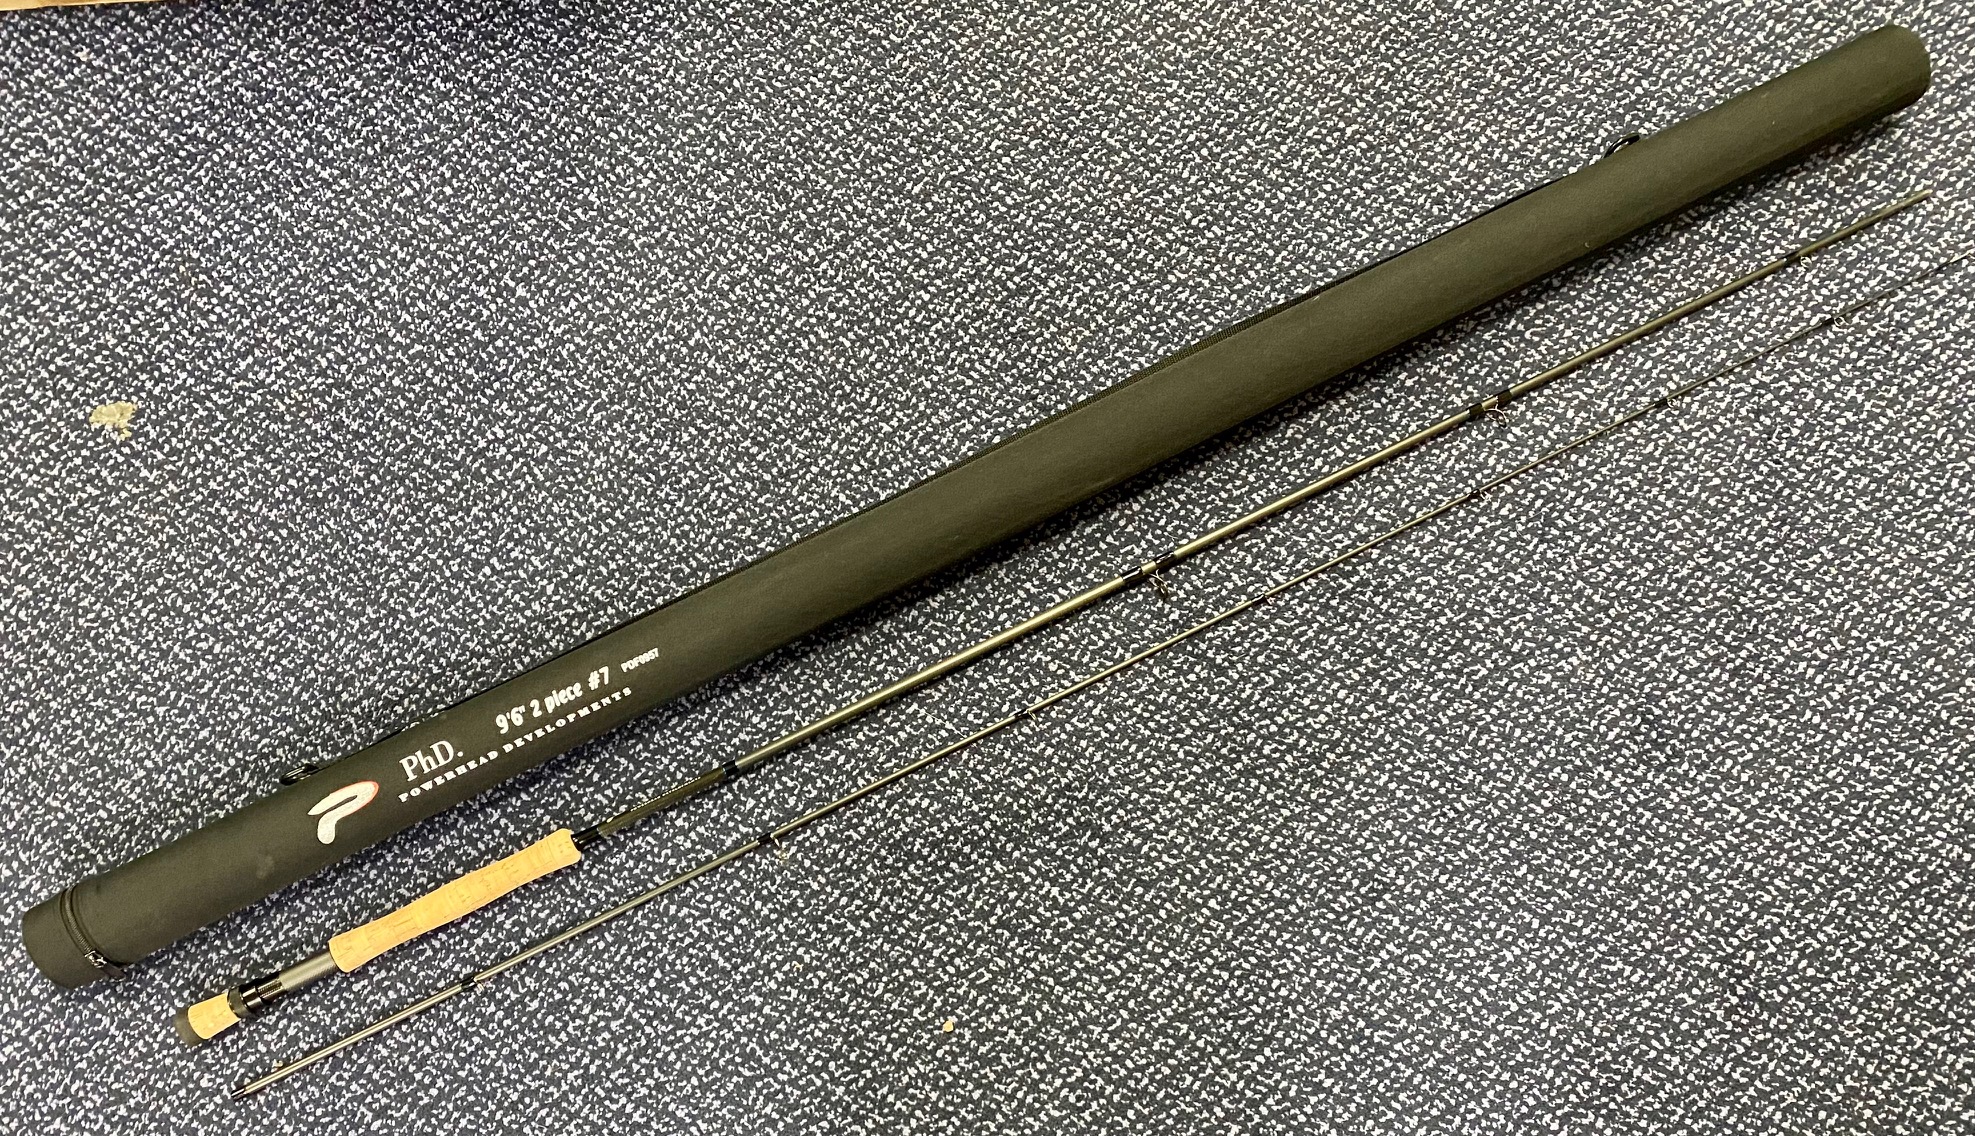 Preloved Powerhead Developments PhD. 9ft6 #7 2 piece fly rod (in tube) -  Used – Glasgow Angling Centre